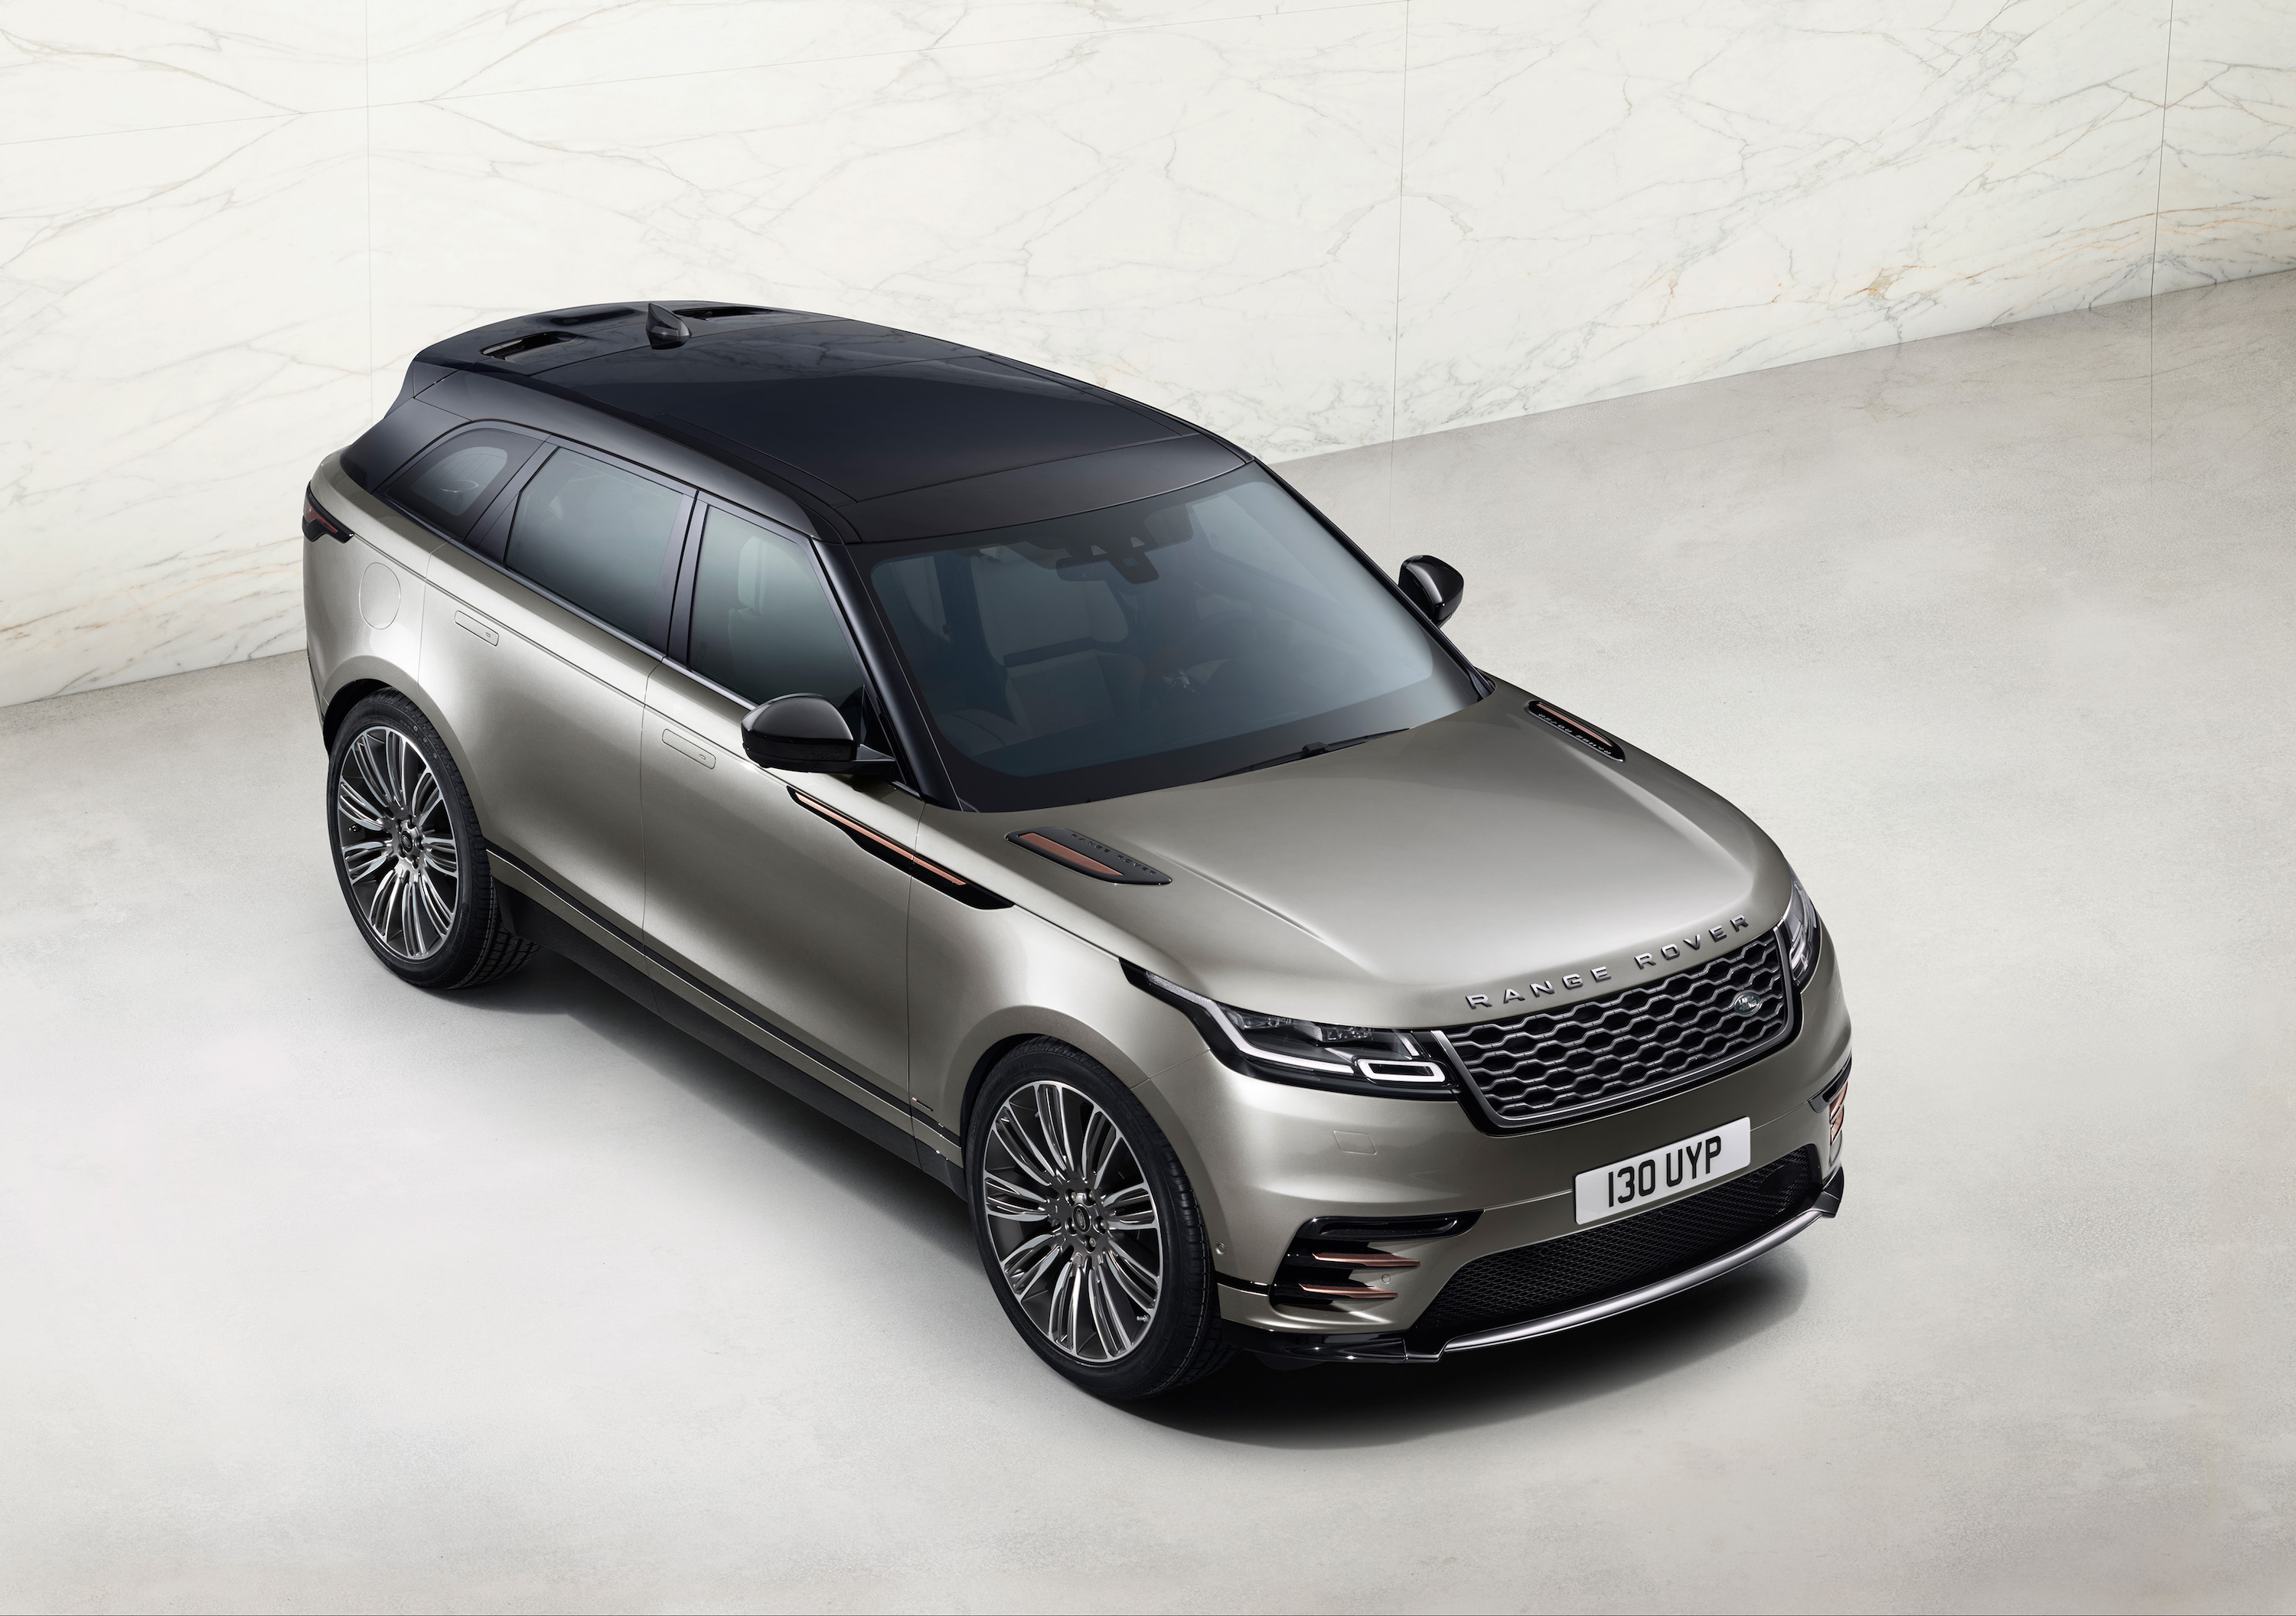 3000x2112 2018 Range Rover Velar, HD Cars, 4k Wallpapers, Images, Backgrounds, Photos and Pictures